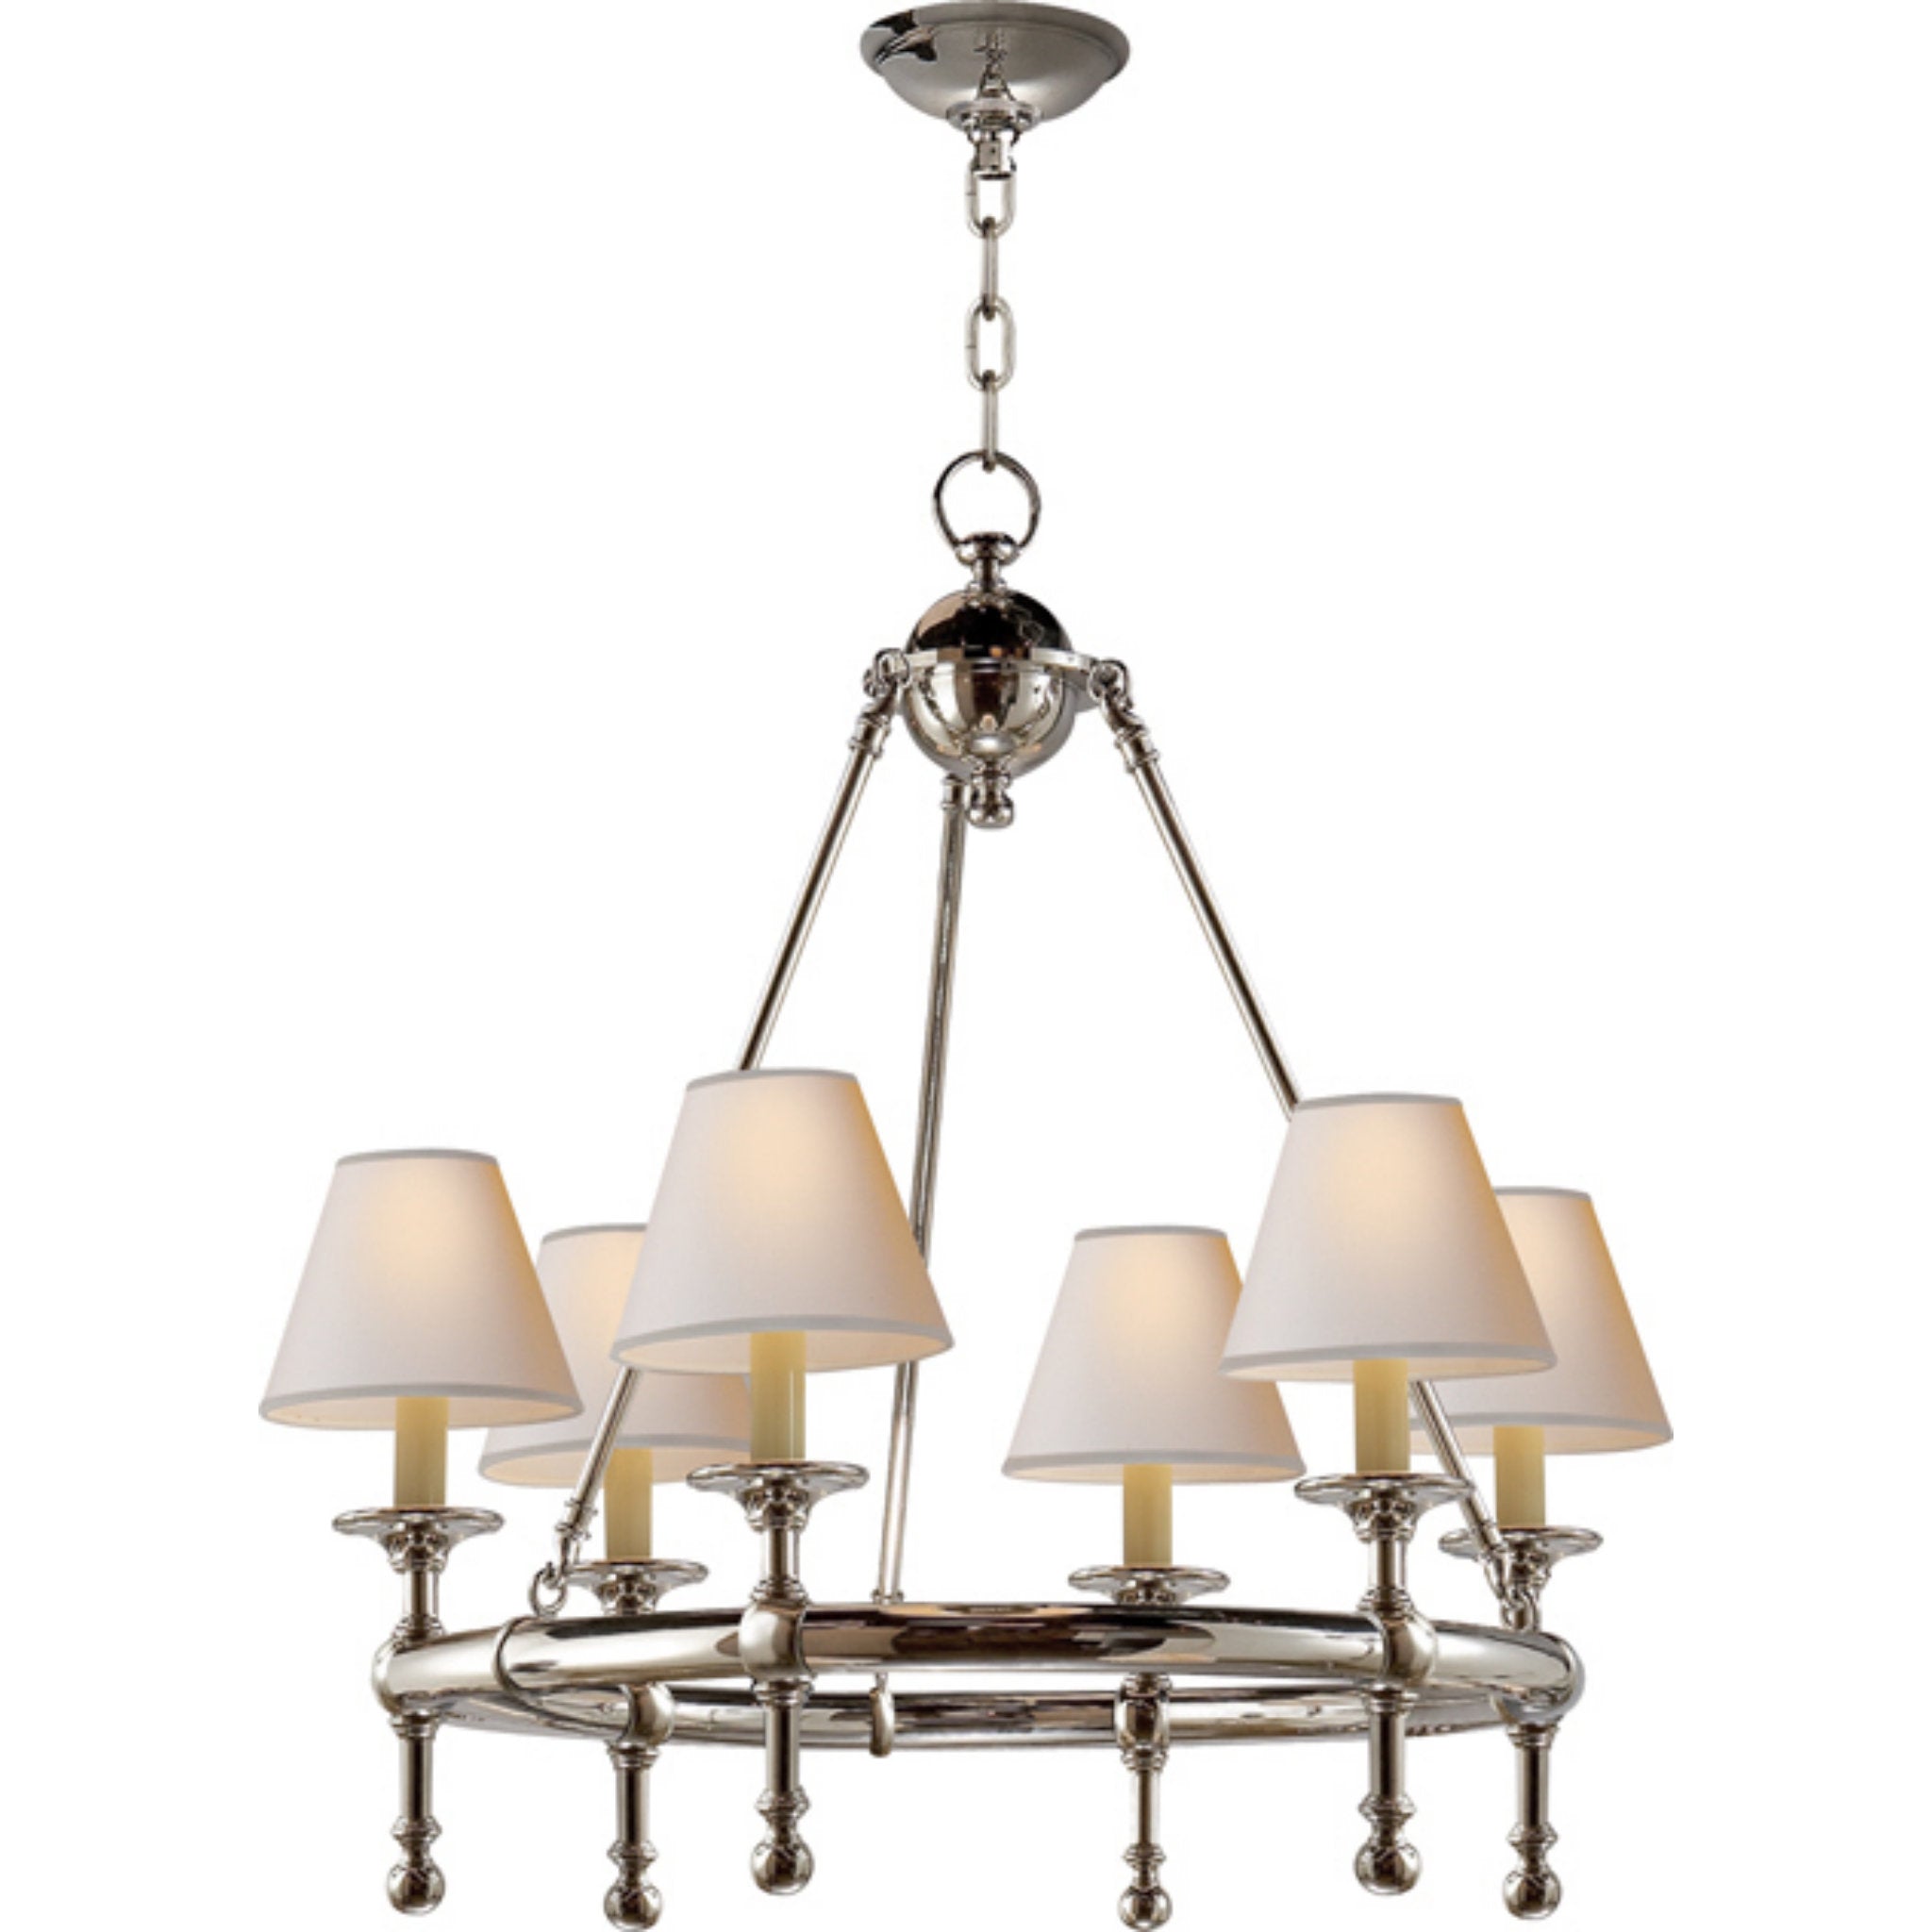 Chapman & Myers Classic Mini Ring Chandelier in Polished Nickel with N